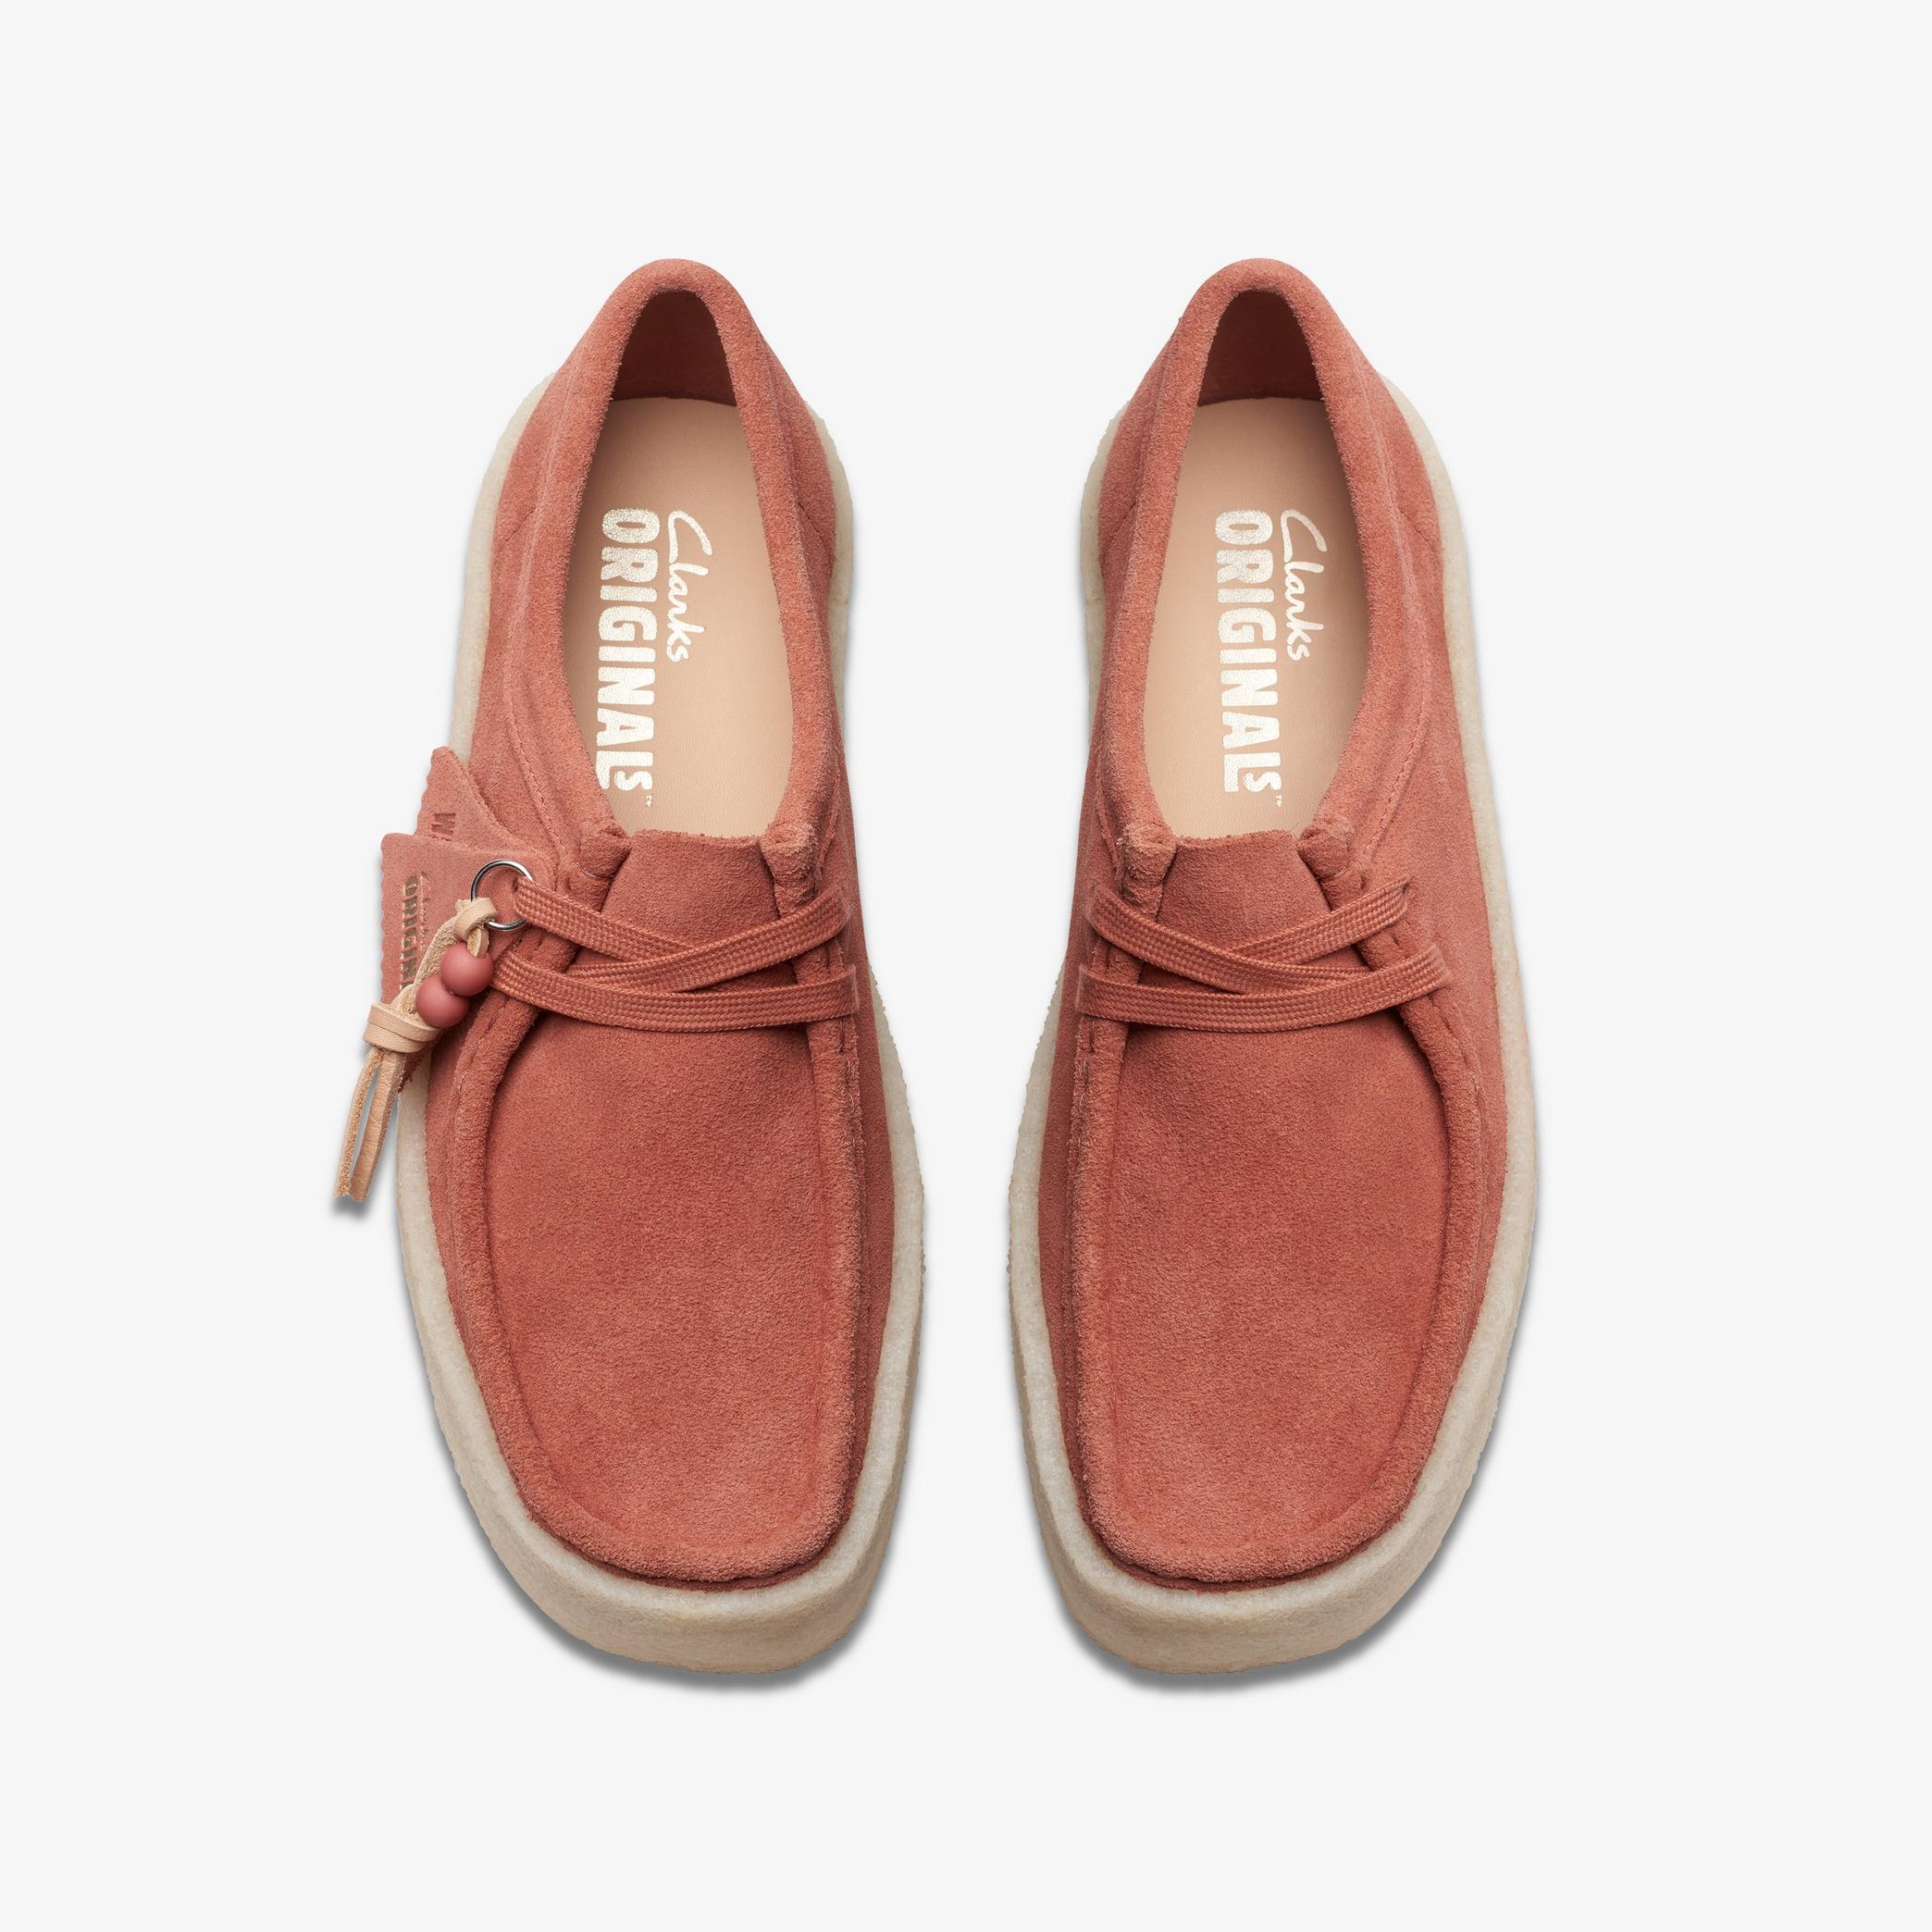 Wallabee Cup Terracotta Suede Wallabee, view 6 of 7